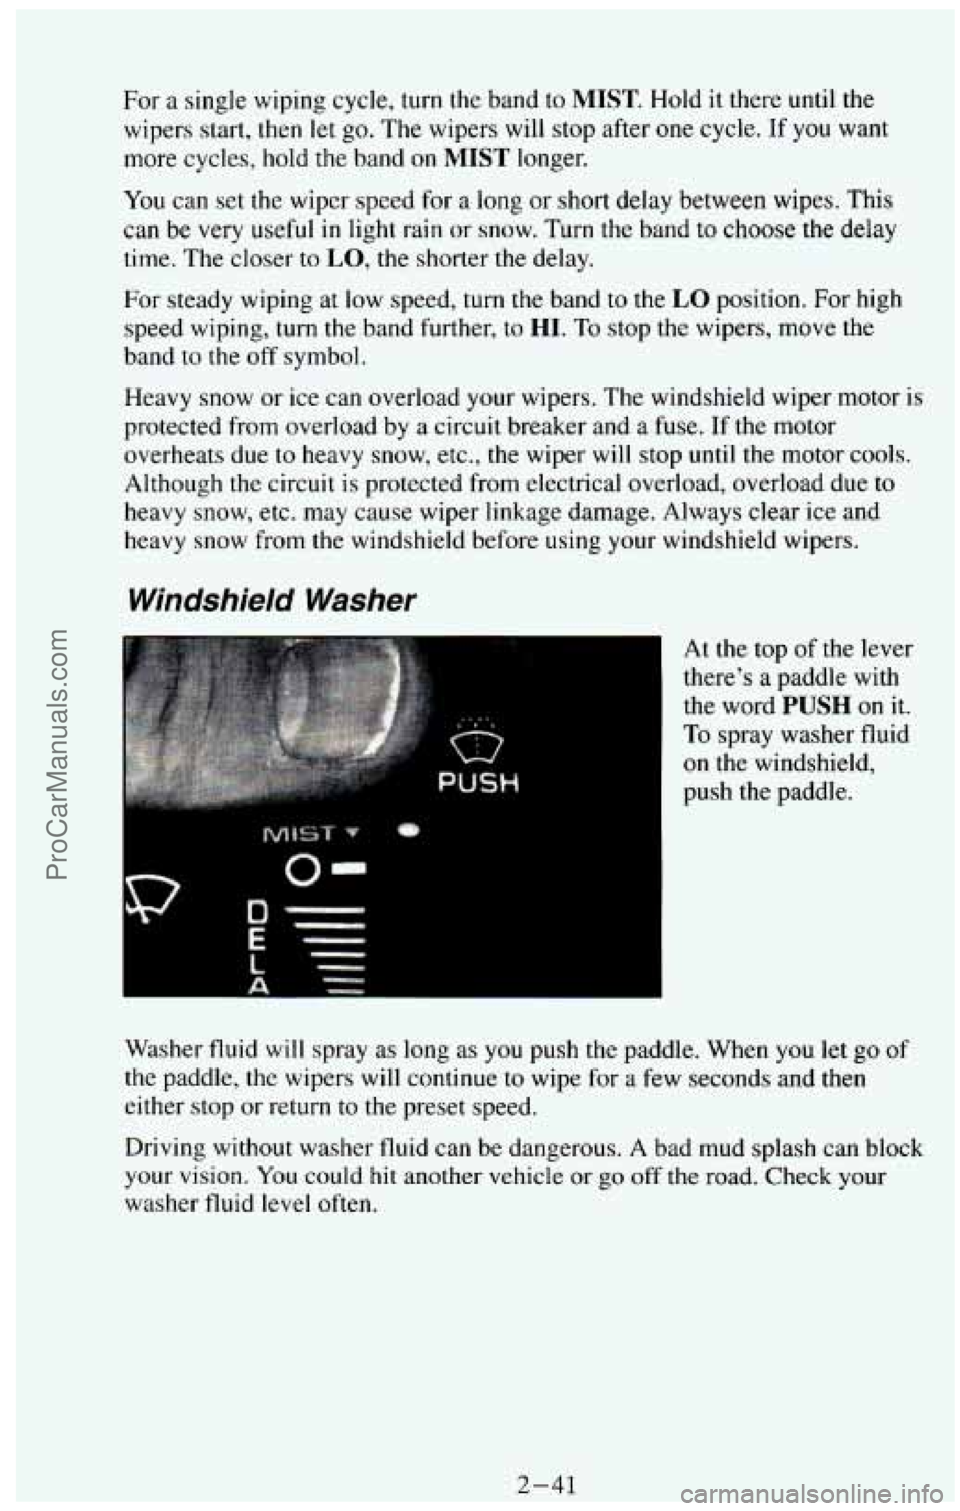 CHEVROLET SUBURBAN 1994  Owners Manual For a single wiping cycle, turn  the  band to MIST. Hold it there  until  the 
wipers  start, then let go. 
The wipers will stop after one cycle.  If you want 
more  cycles,  hold 
the band on MIST lo